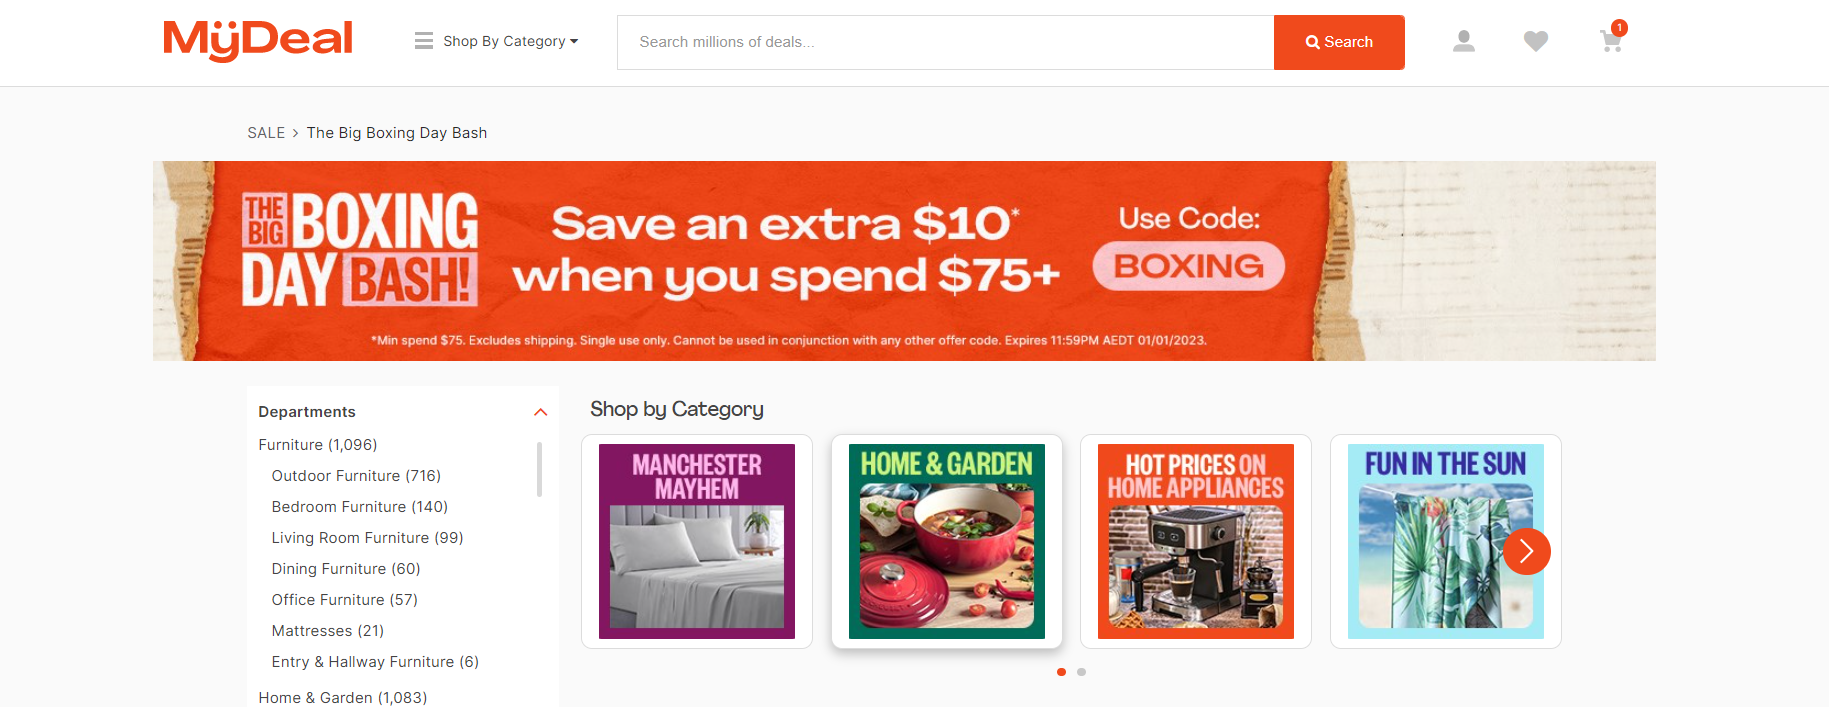 MyDeal Boxing Day Bash - Prices slashed on 1000's of items + Extra $10 OFF $75+ with coupon